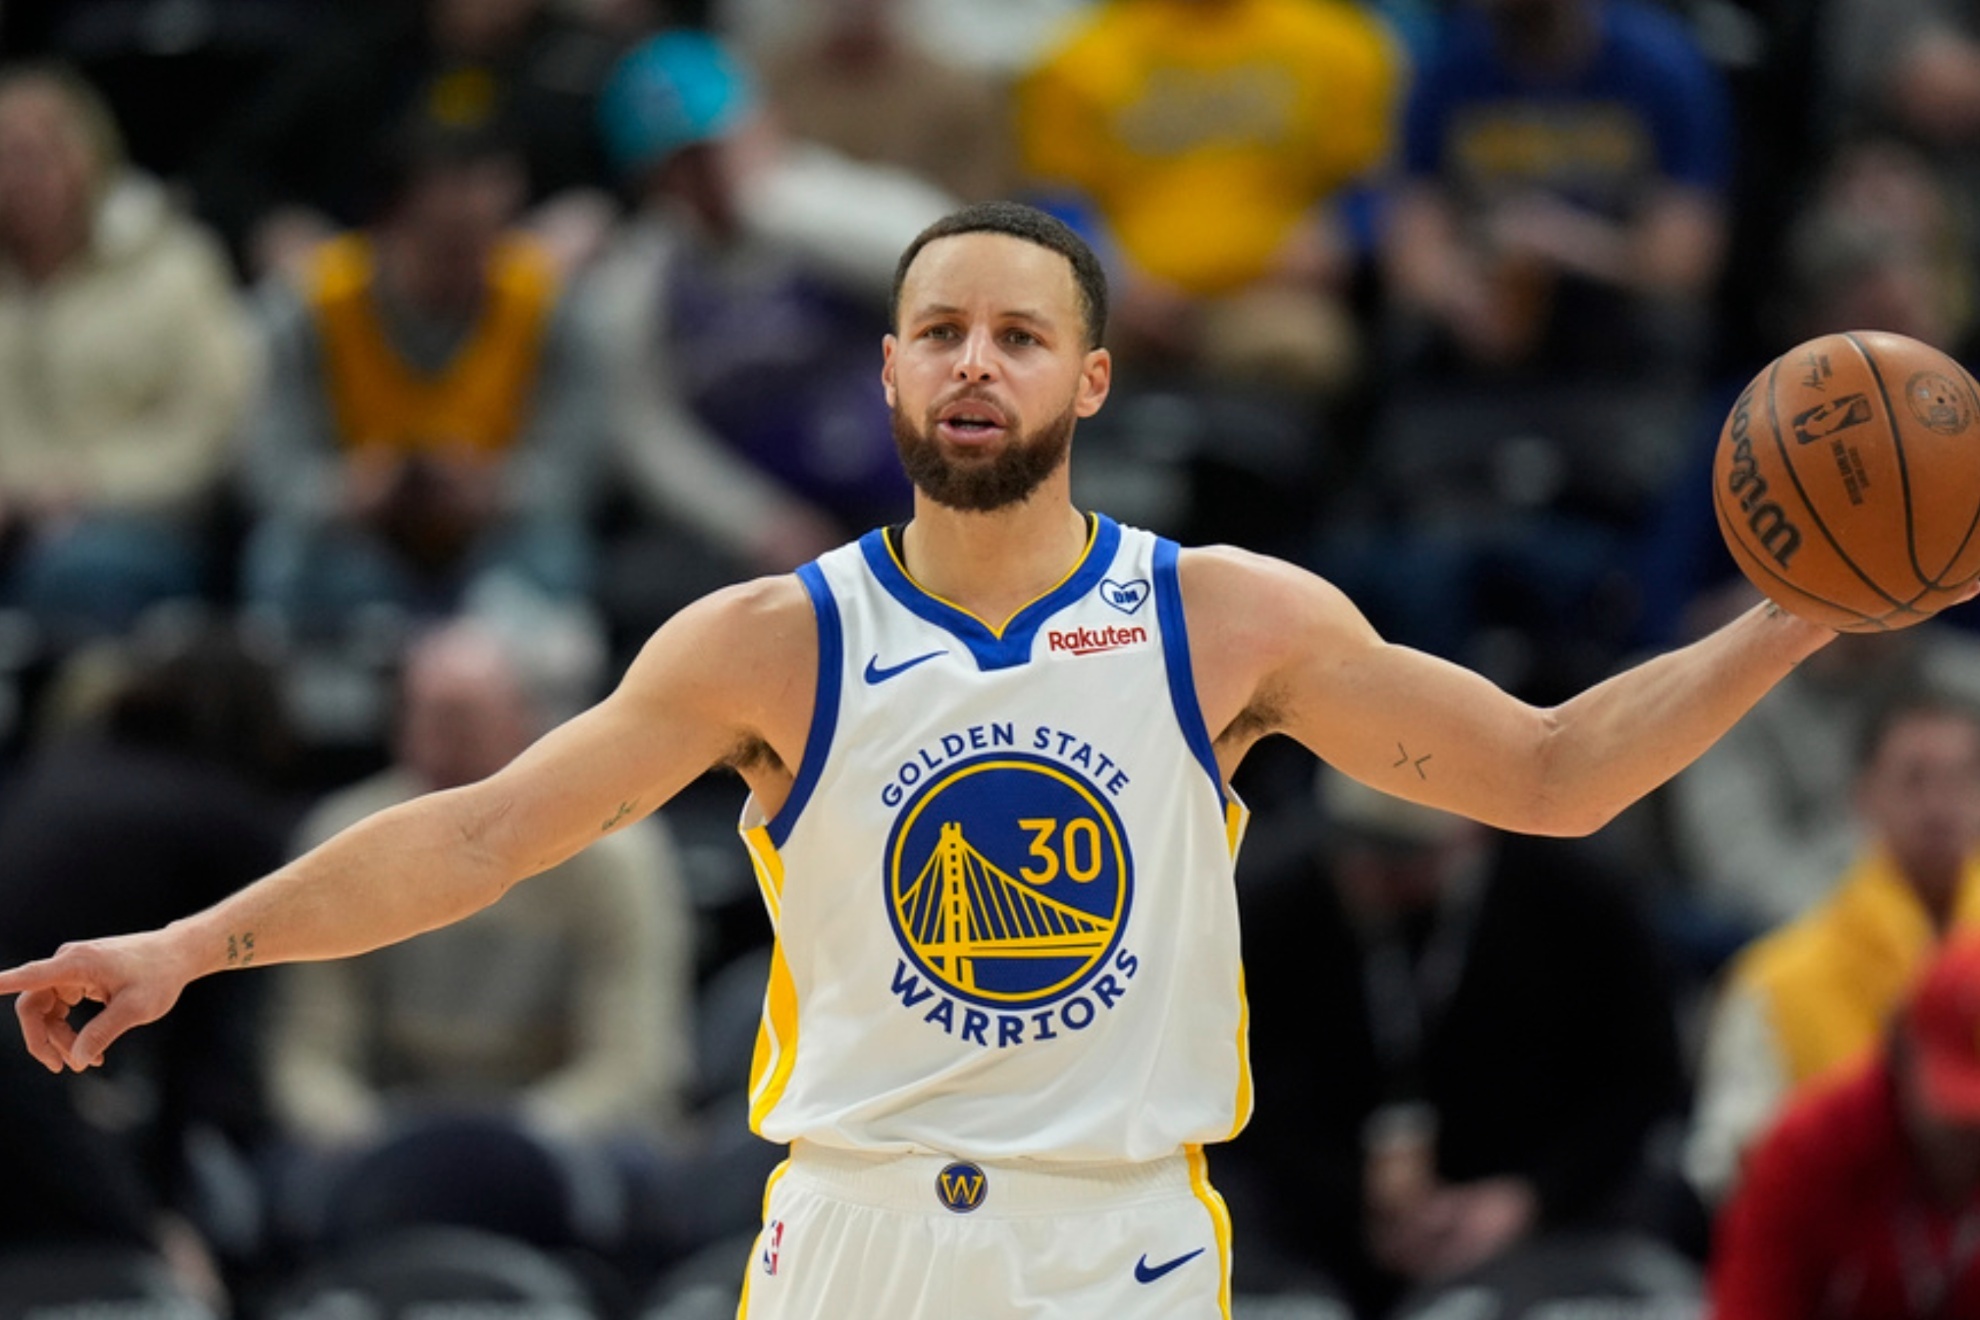 Stephen Curry was named an All-Star reserved for the first time in his career